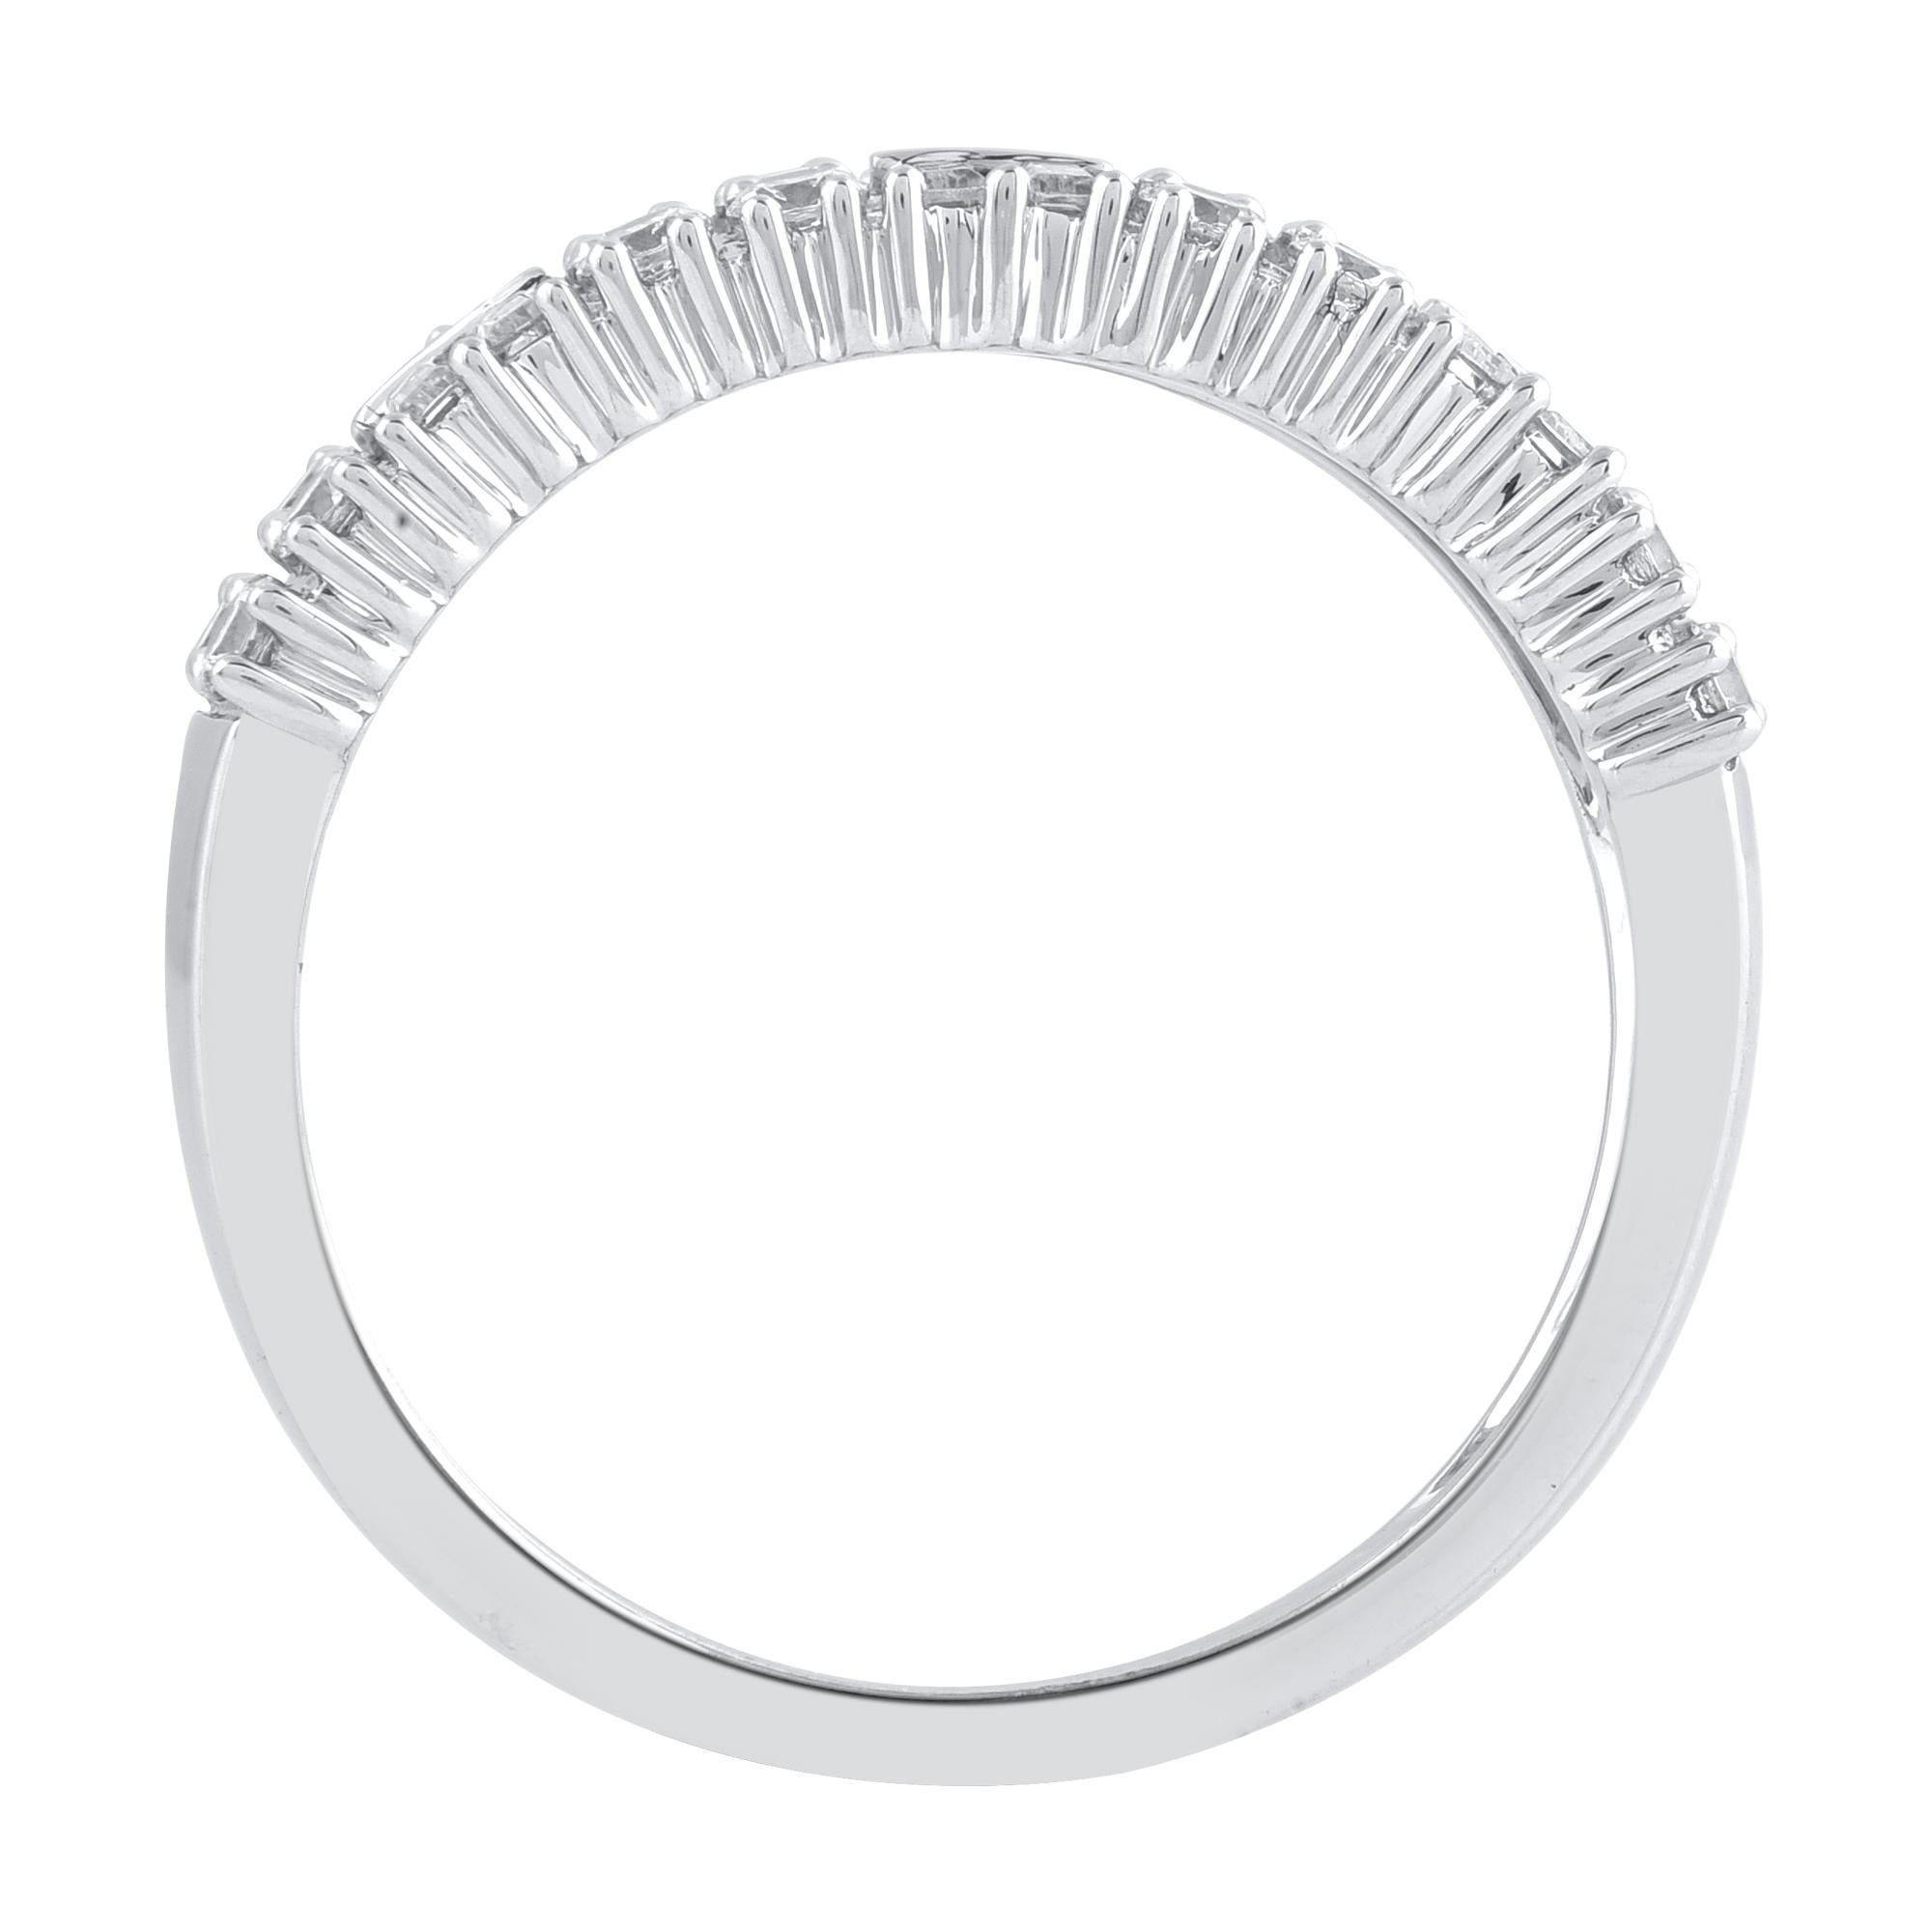 Contemporary TJD 1.0 Carat Brilliant Cut & Baguette Diamond 18KT White Gold Wedding Band Ring For Sale